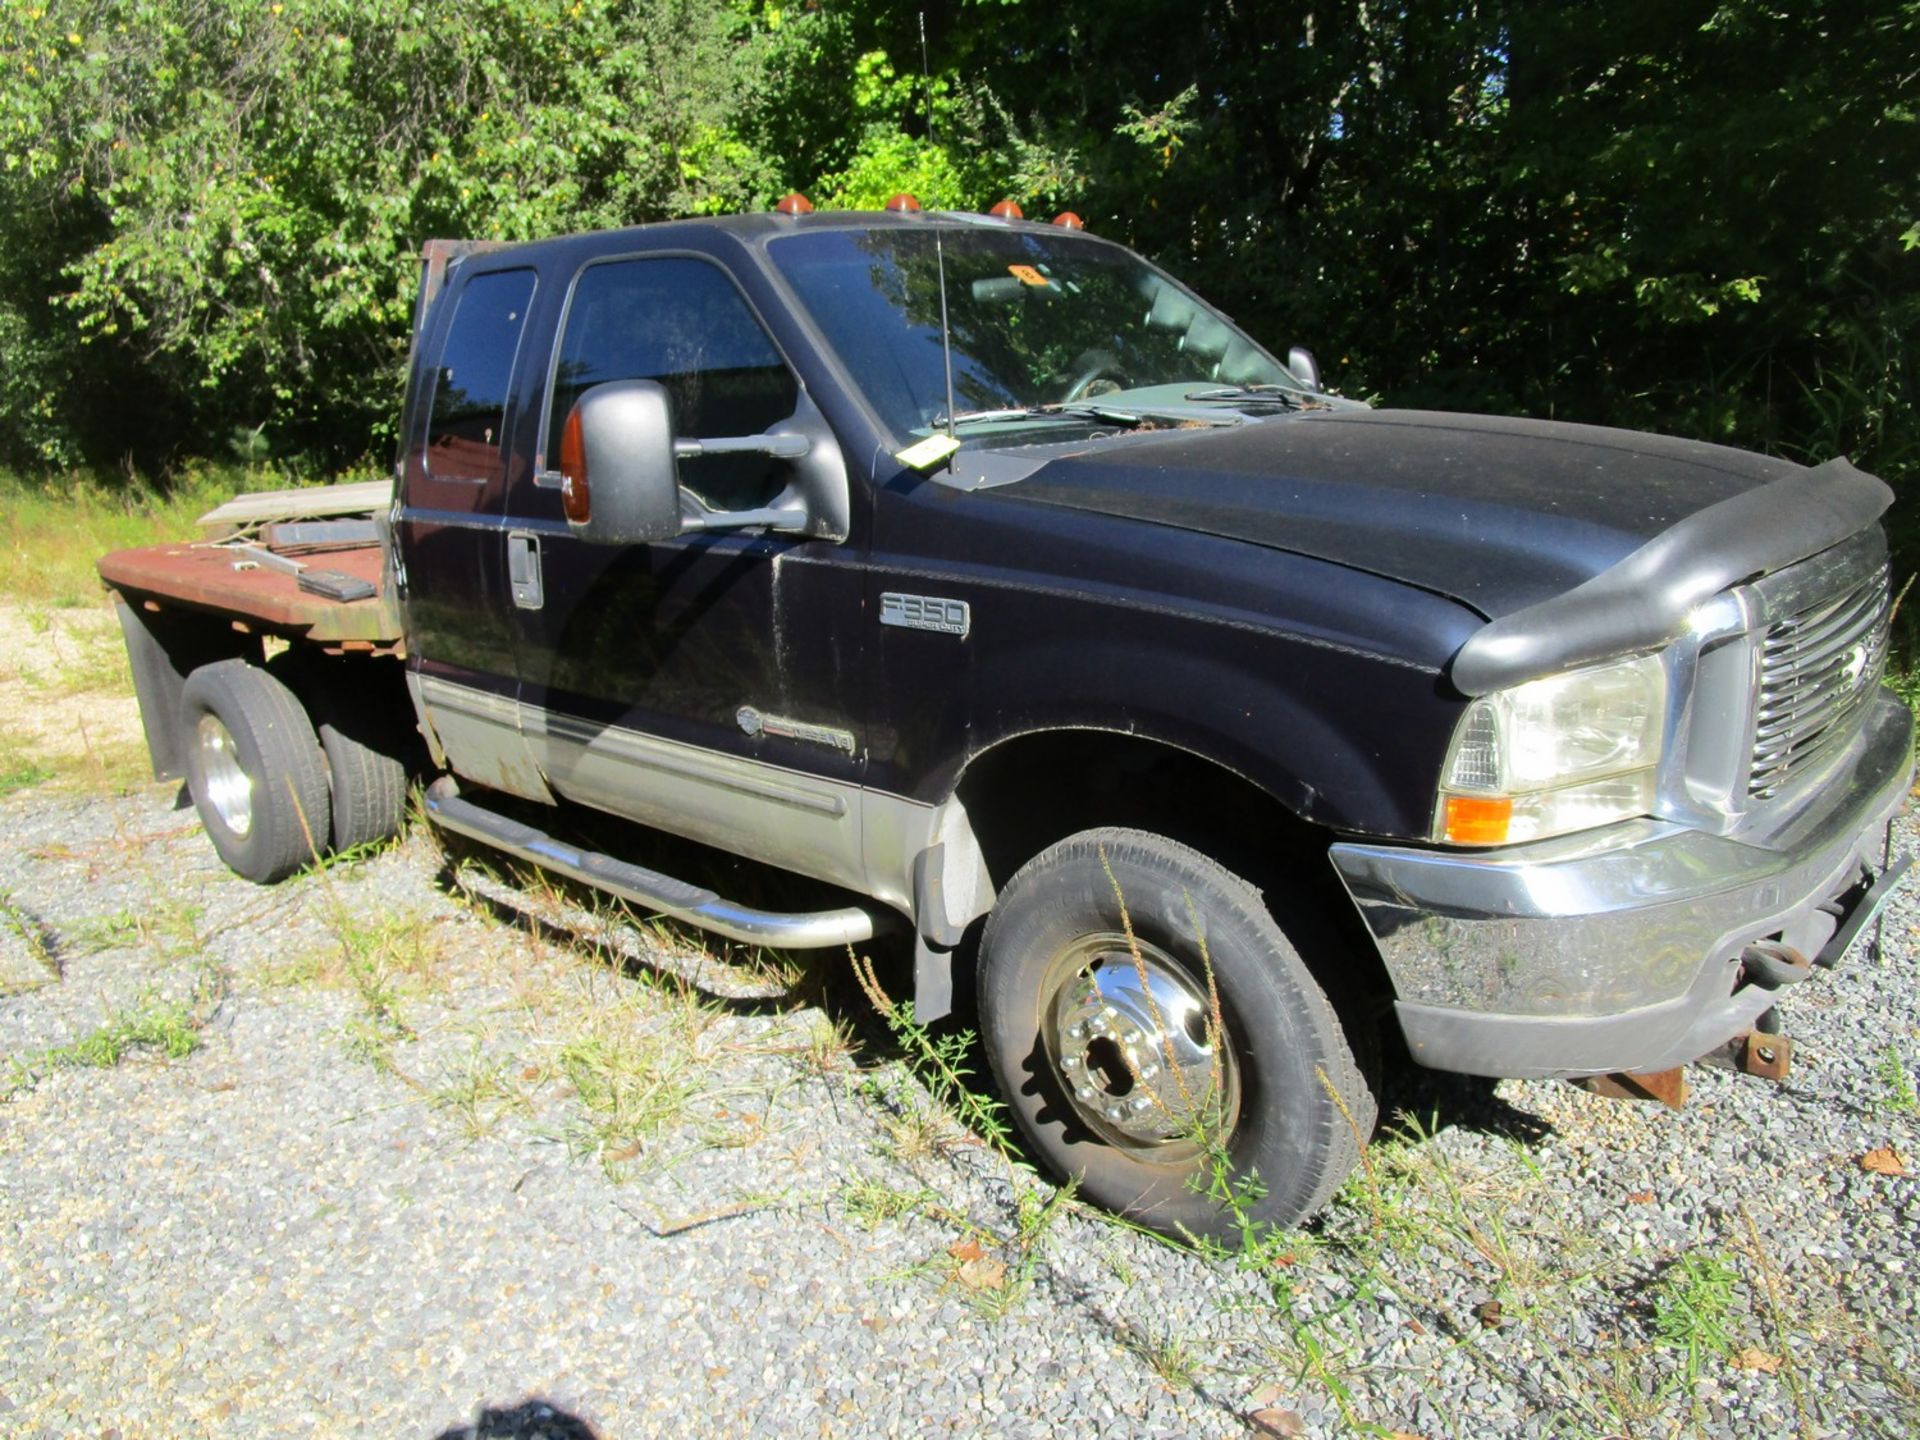 1999 Ford F350 Super Duty Flatbed Truck, Dually Converted, 7.3 Power Stroke Diesel, Automatic, Wired - Image 2 of 3